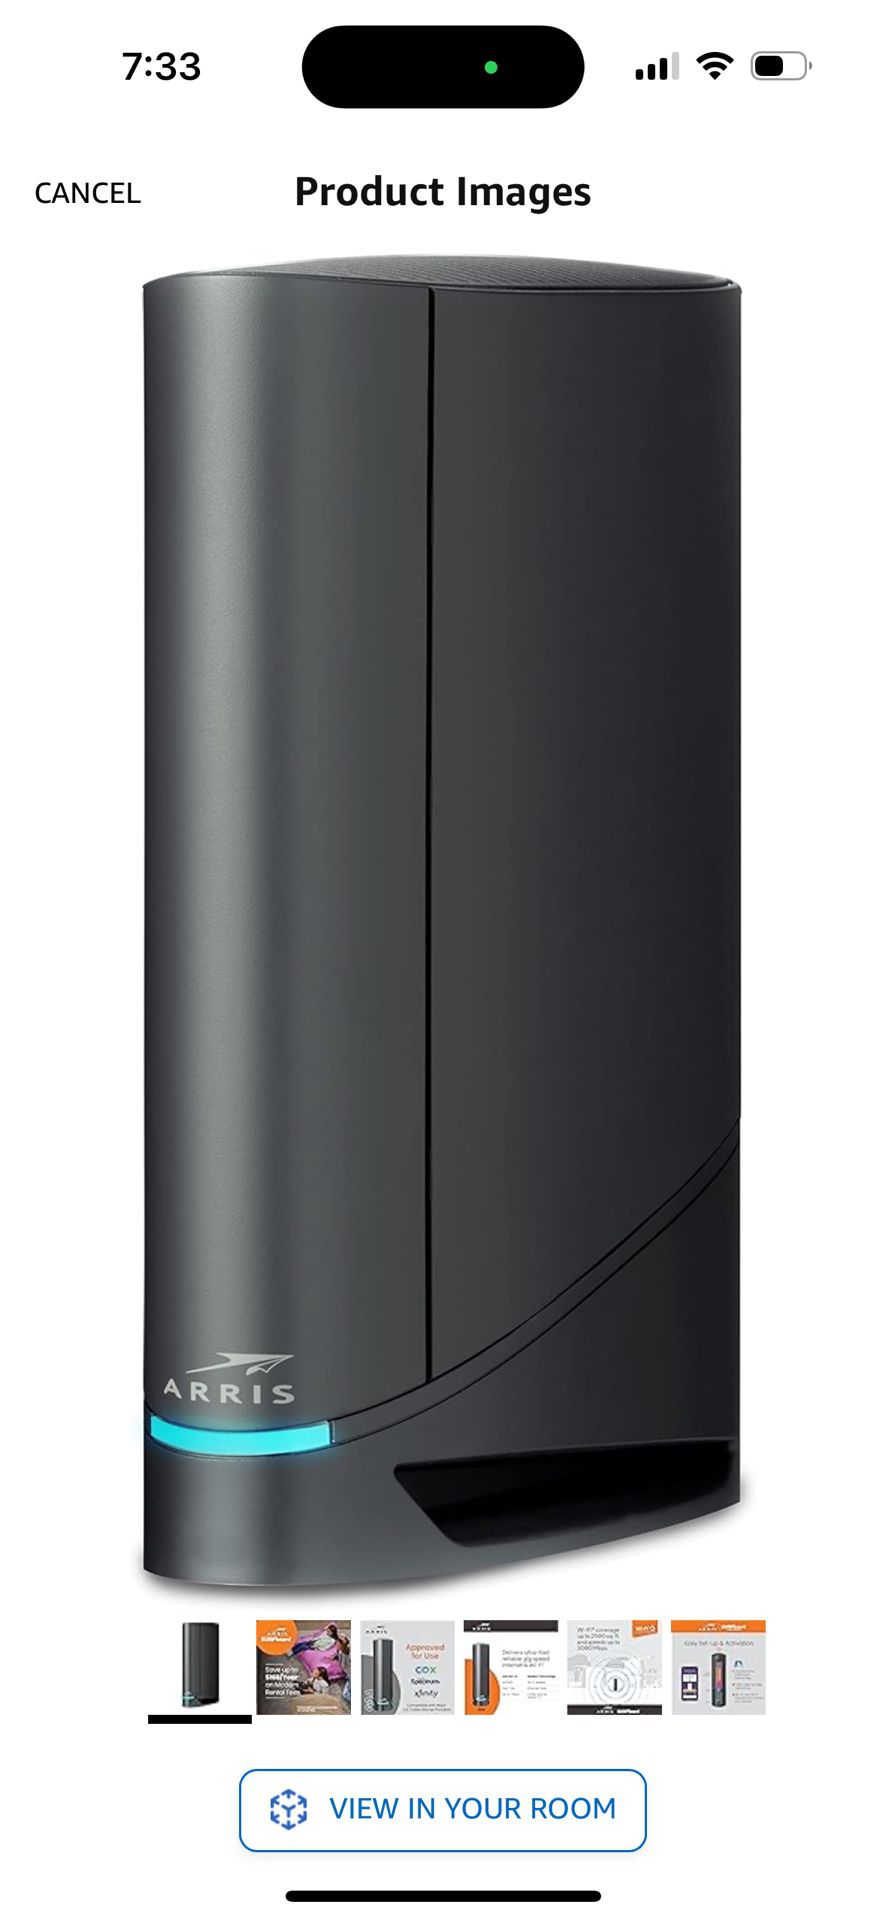 ARRIS Surfboard G34 DOCSIS 3.1 Gigabit Cable Modem & Wi-Fi 6 Router (AX3000) , Approved for Comcast Xfinity, Cox, Spectrum & More , Four 1 Gbps Ports 